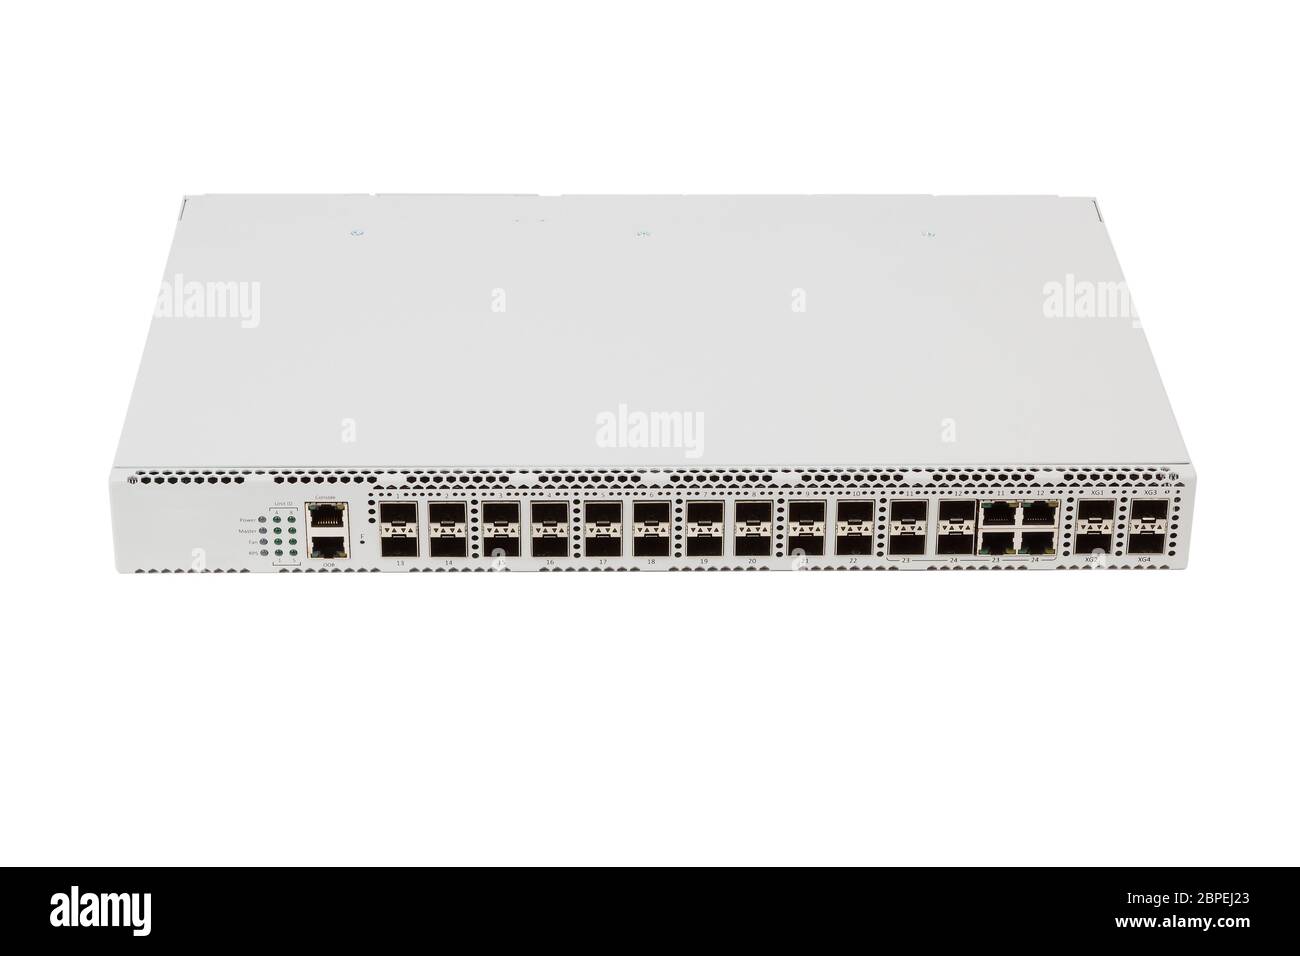 Fiber optic gigabit ethernet switch with SFP module slot and UTP category 5 connectors RJ-45 isolated on white background Stock Photo